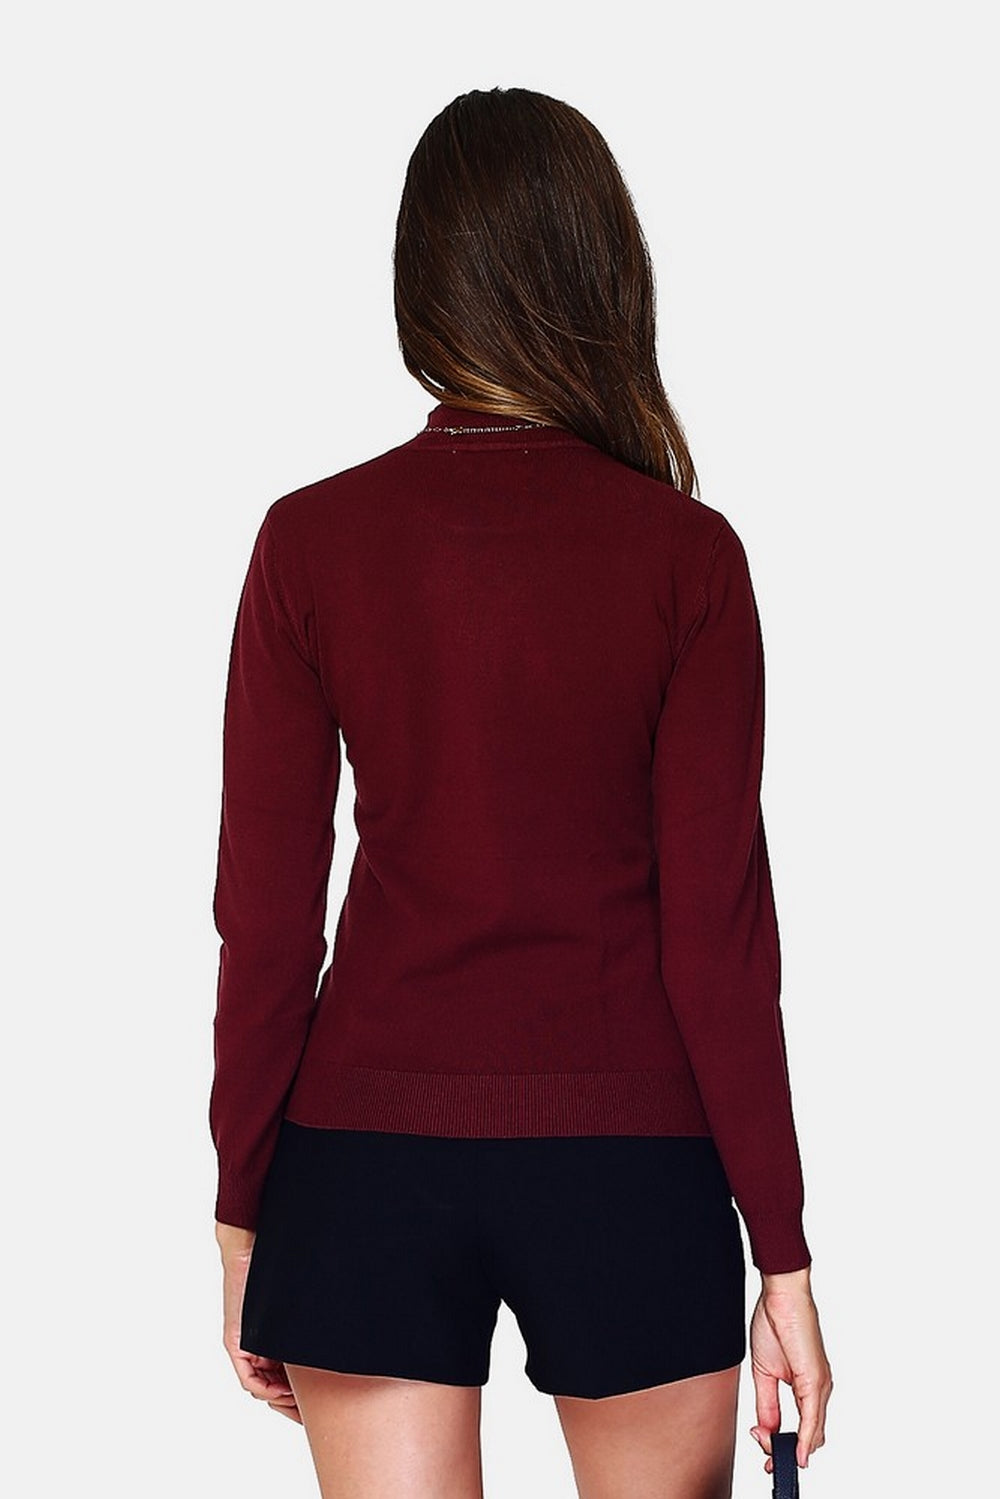 Classic 3-ply knit funnel neck sweater with long sleeves